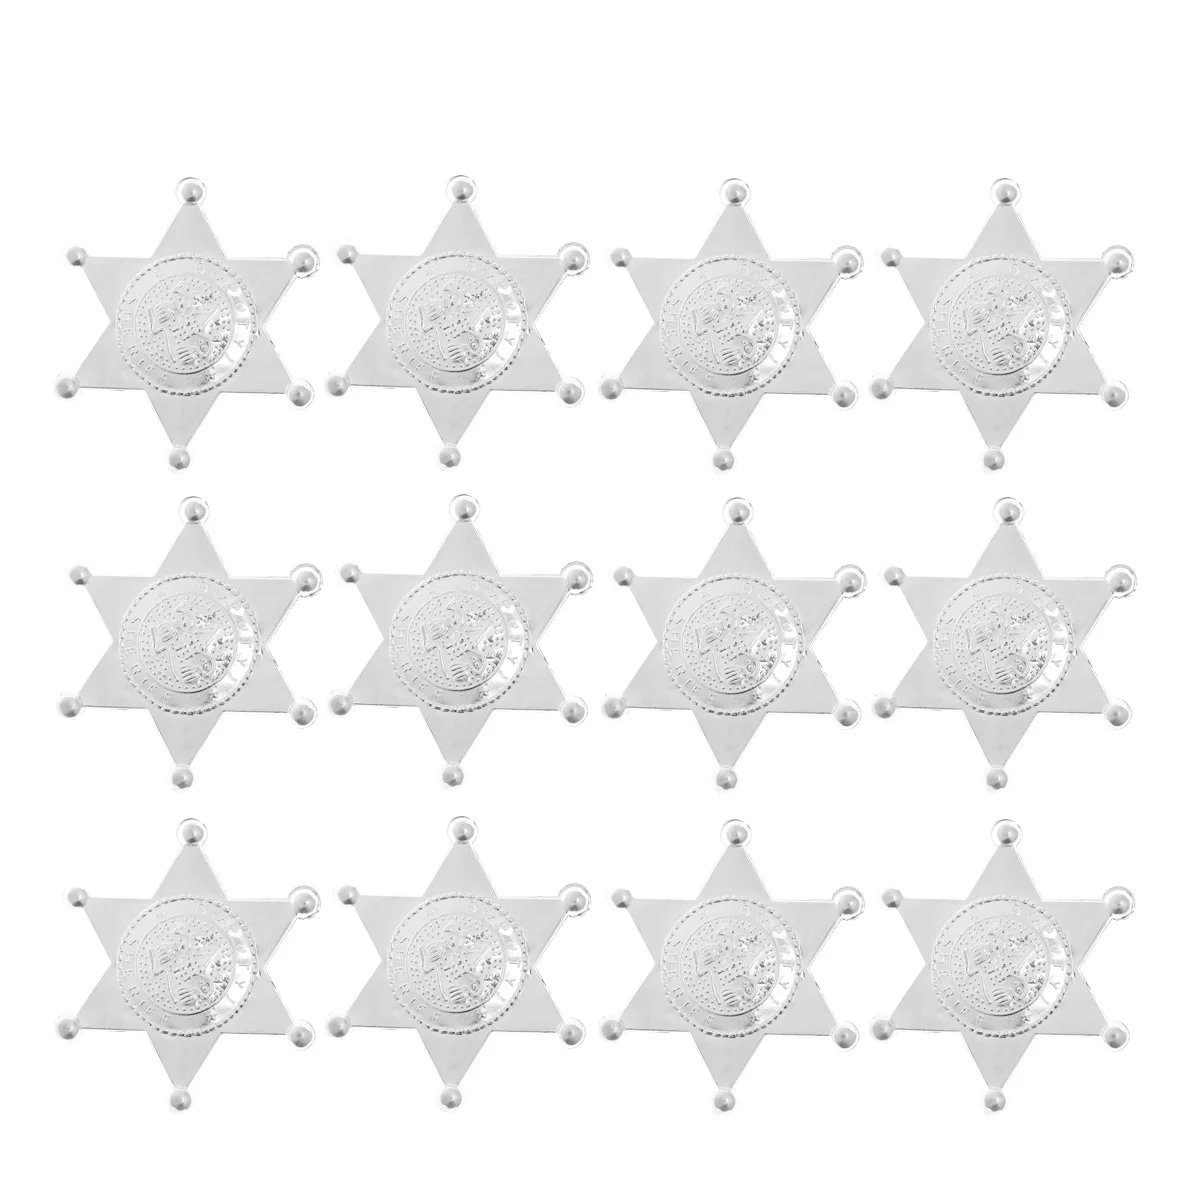 

12pcs Plastic Deputy Sheriff Hexagonal Star Badges Personalized Officer Name Tags Brooch for Law Enforcement Officer Costume